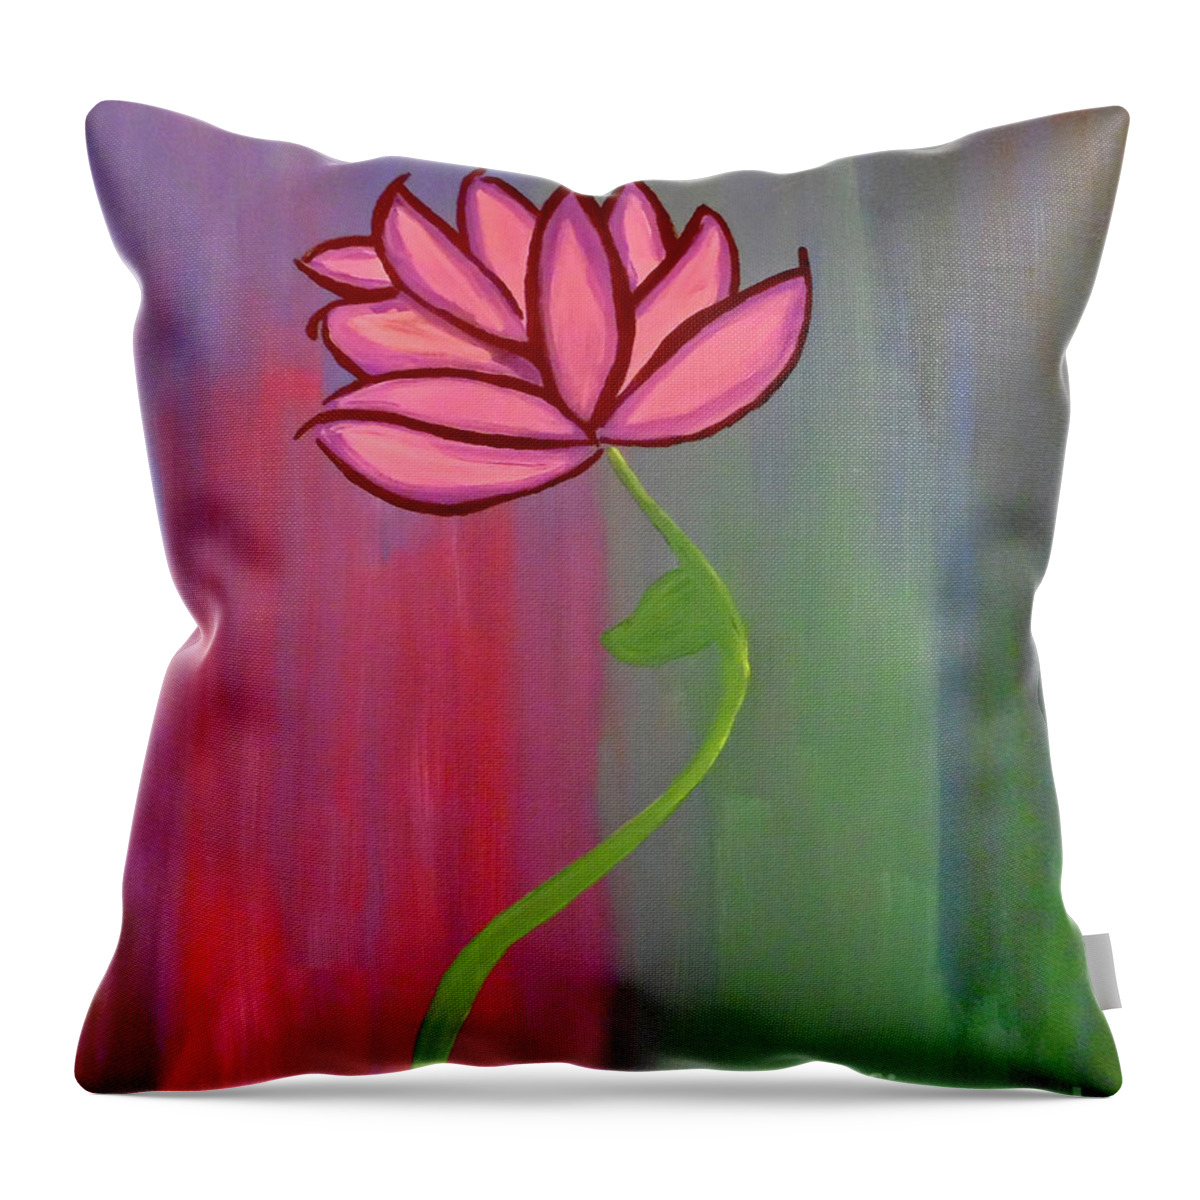 Purple Flower Throw Pillow featuring the painting Violet Bloom by Jilian Cramb - AMothersFineArt